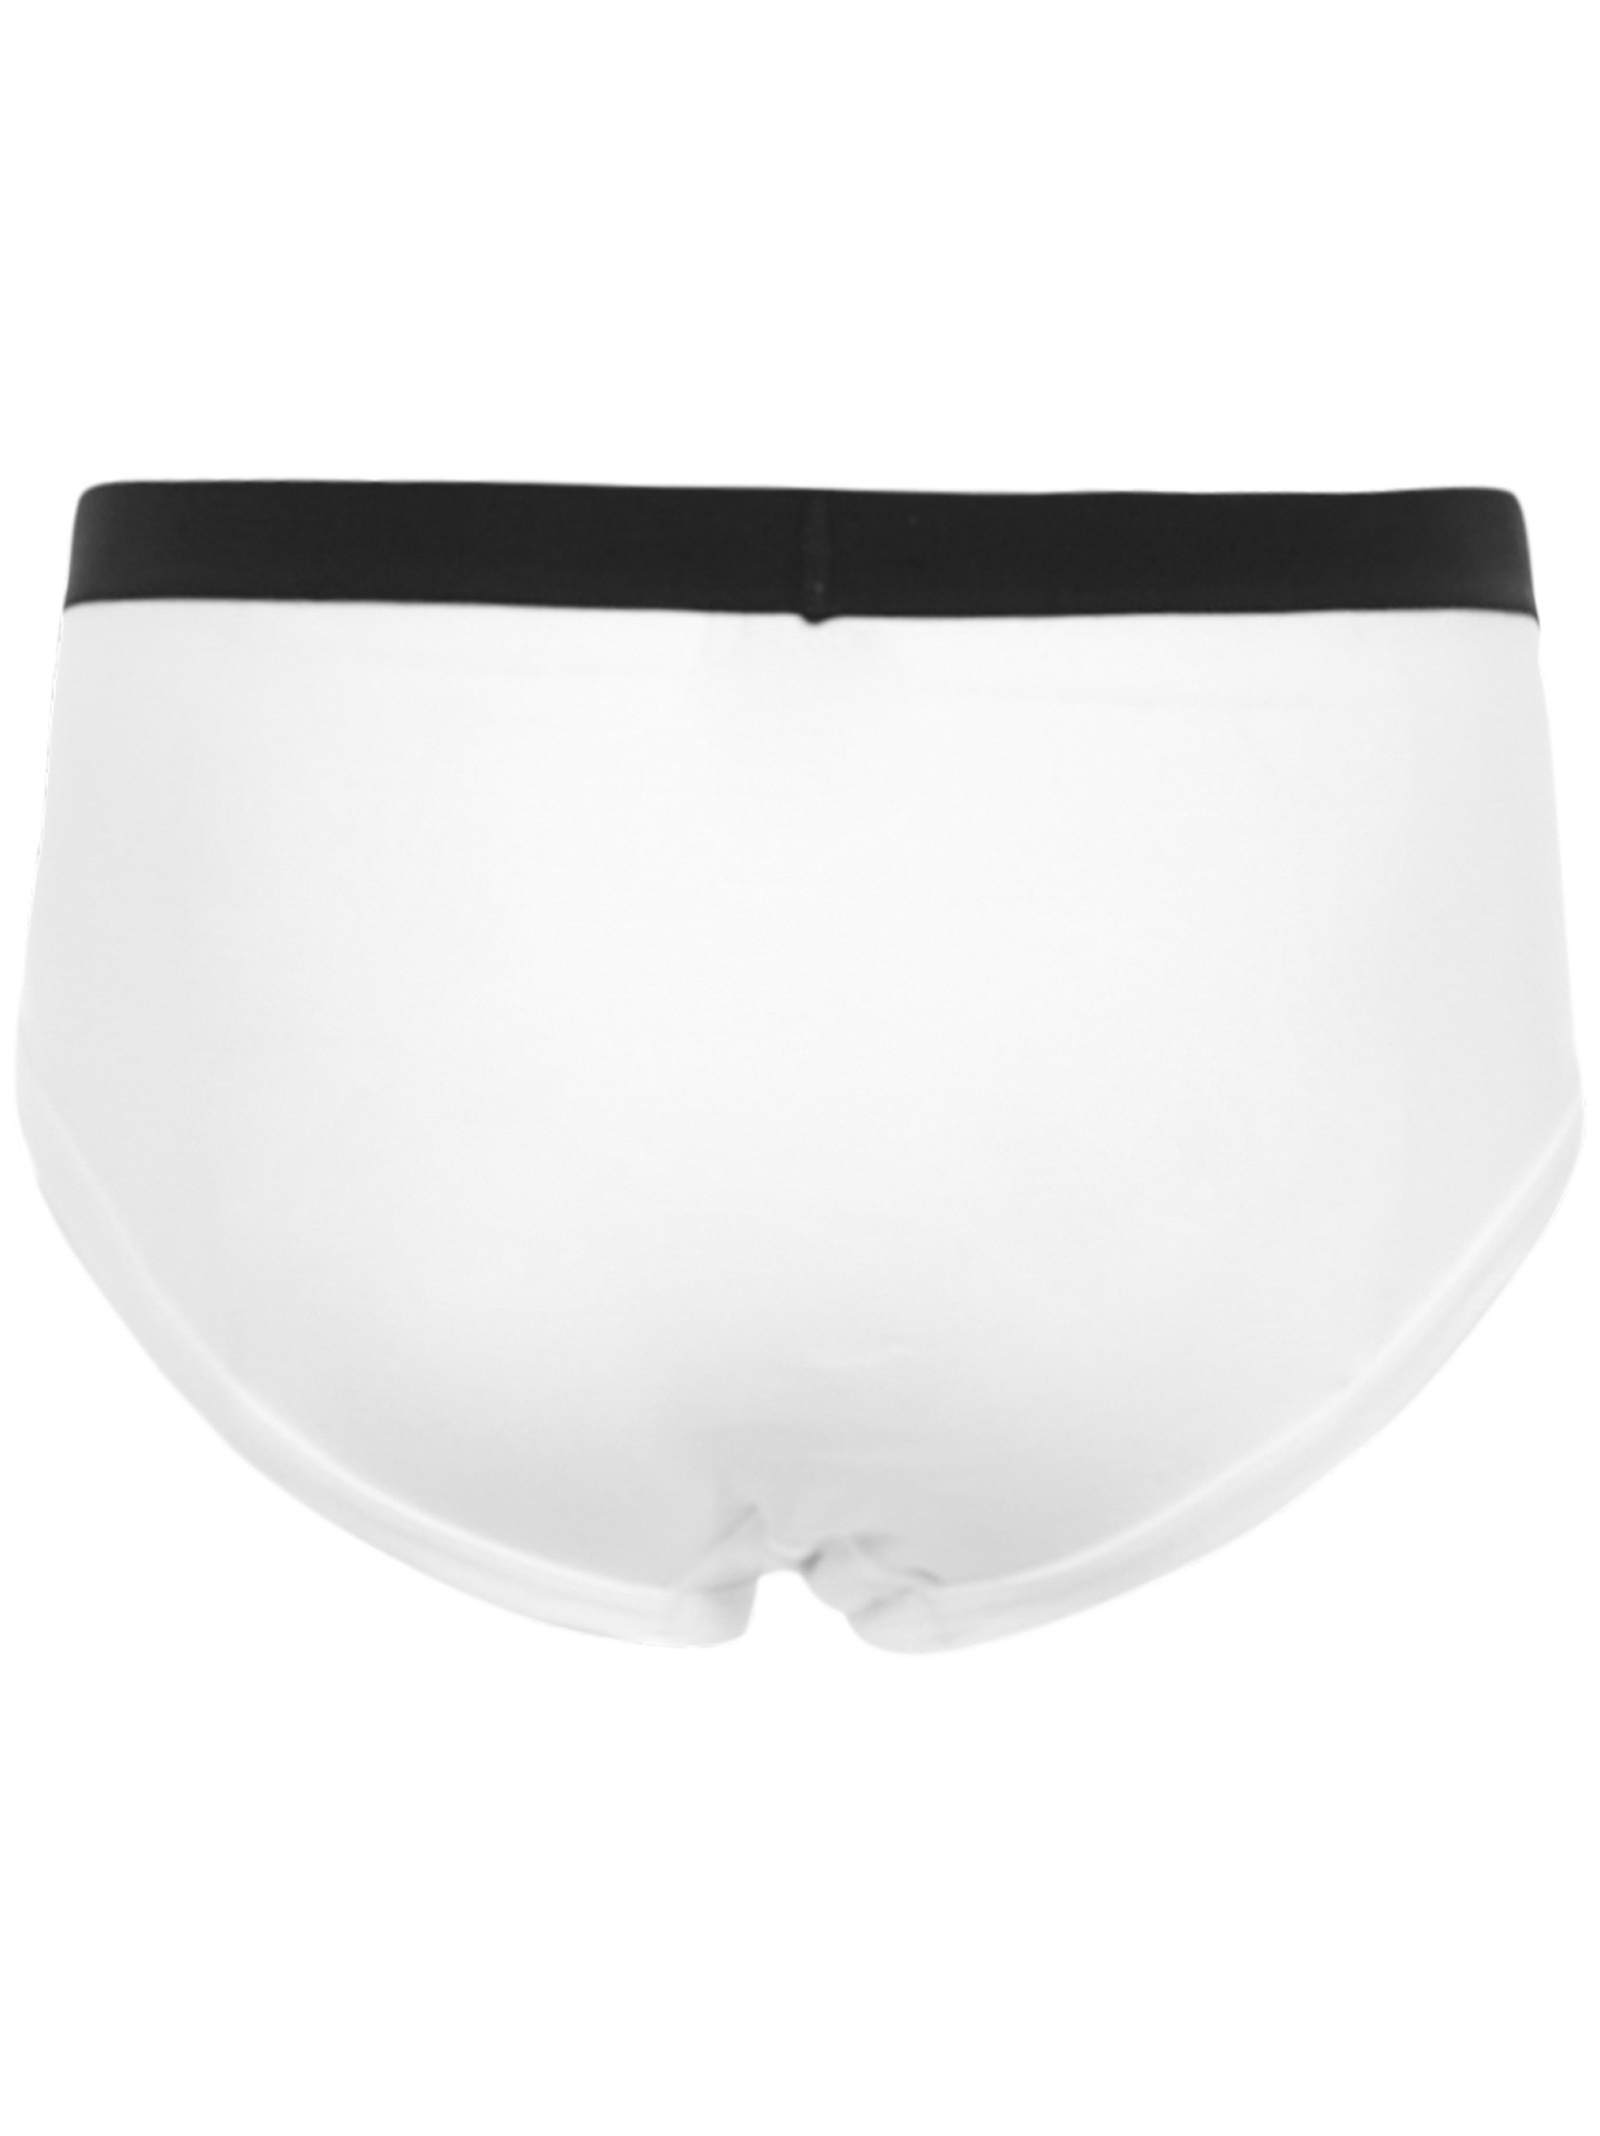 White stretch cotton briefs with black elastic waistband and Tom Ford jacquard logo. - 2